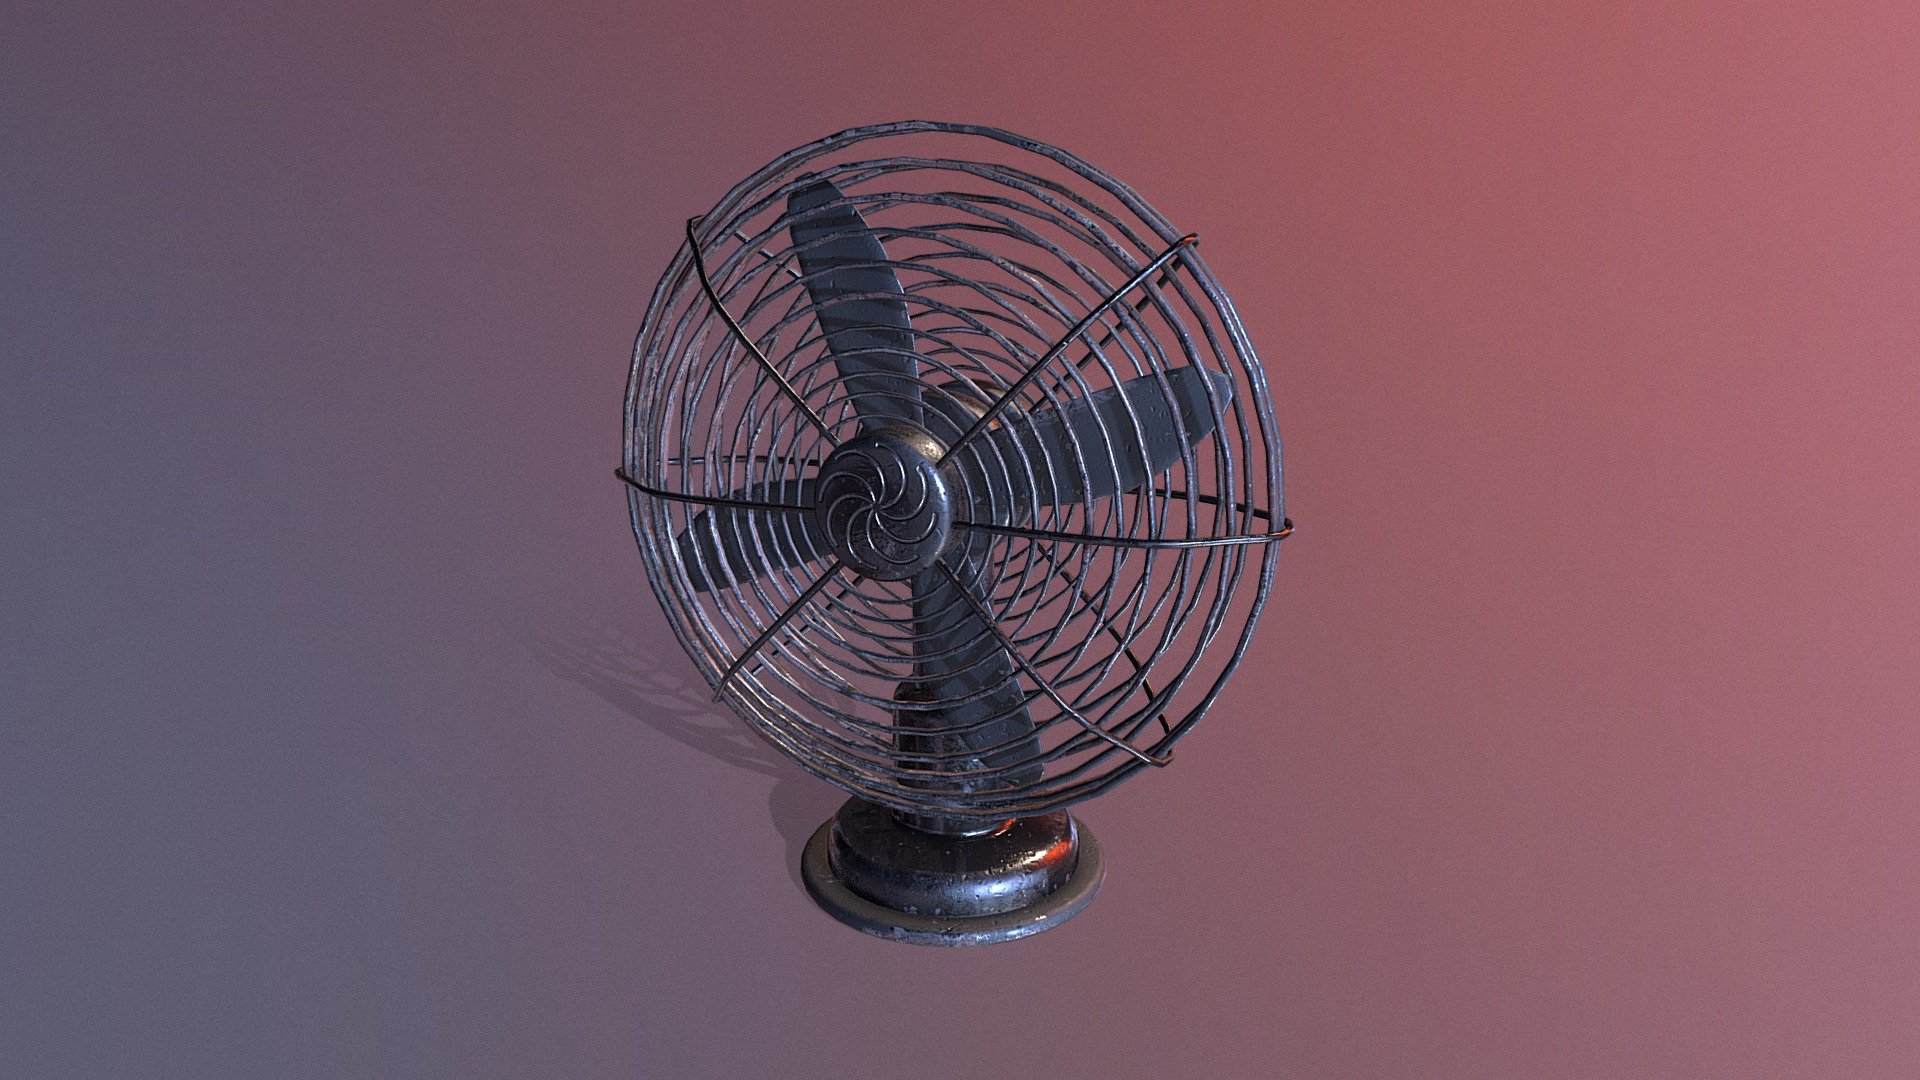 I think its been standing in the rain to long.

Can be used in games 3d model